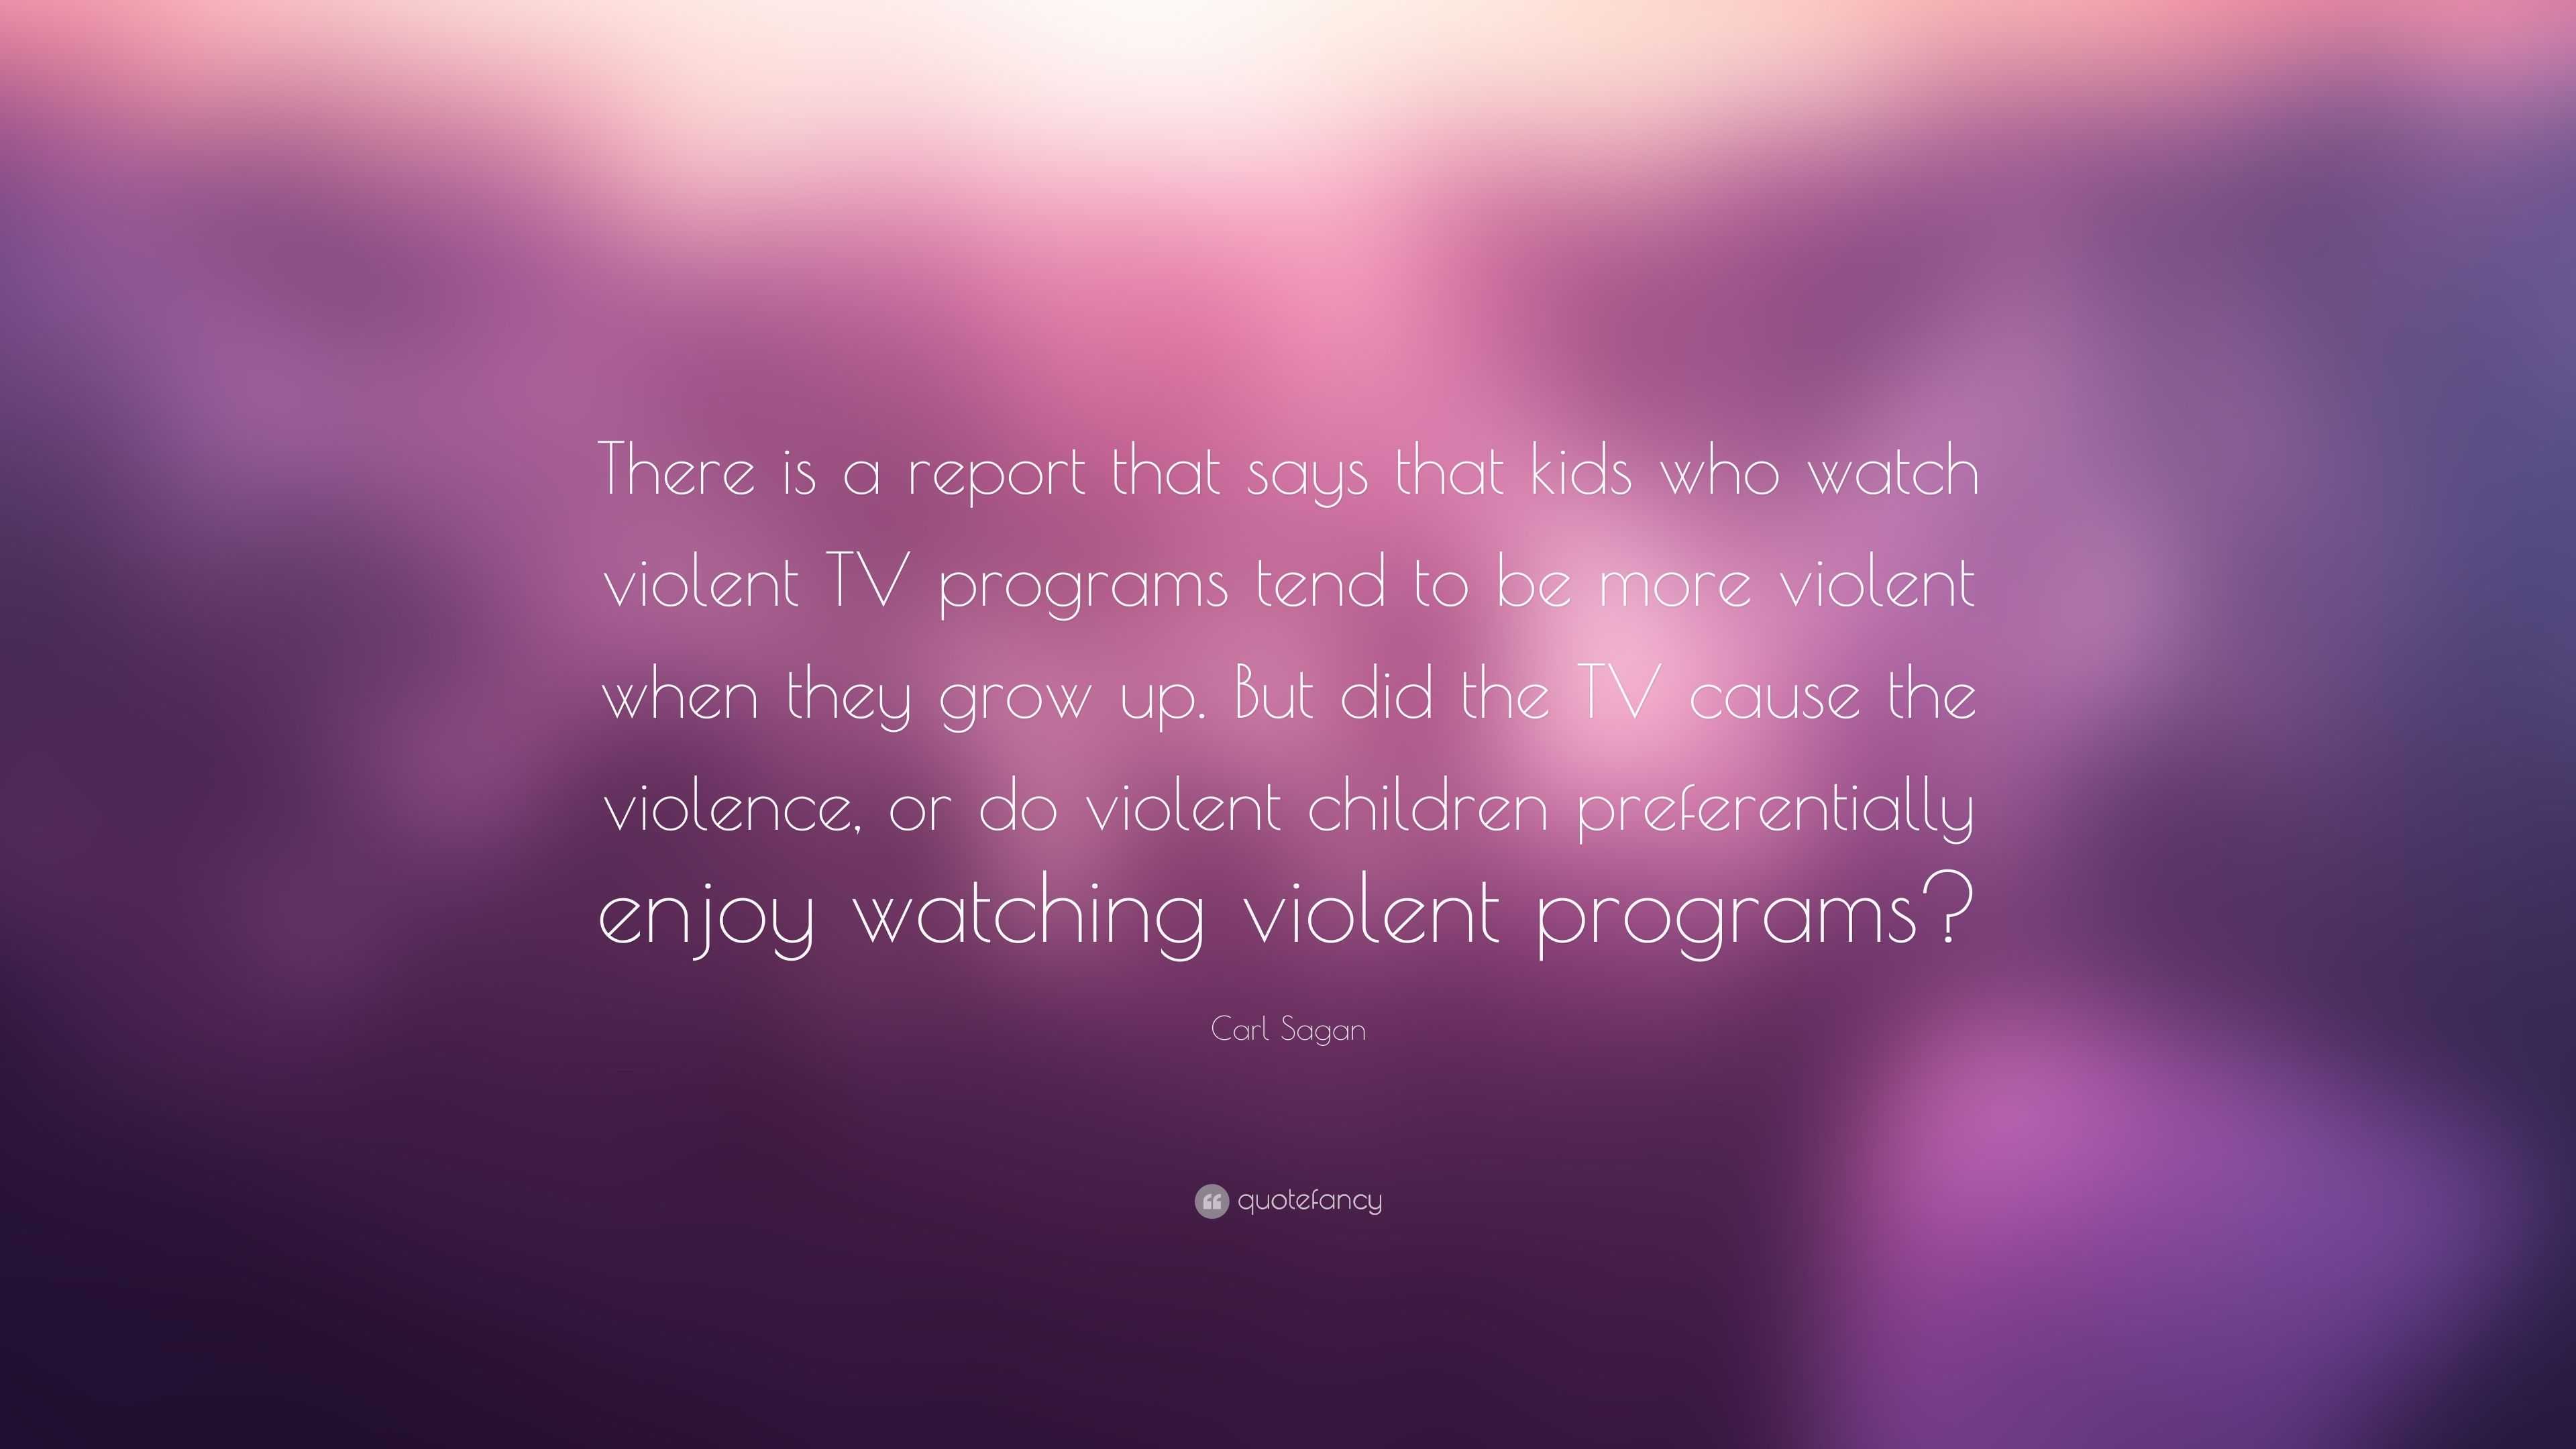 Carl Sagan Quote: “There is a report that says that kids who watch violent  TV programs tend to be more violent when they grow up. But did t...”